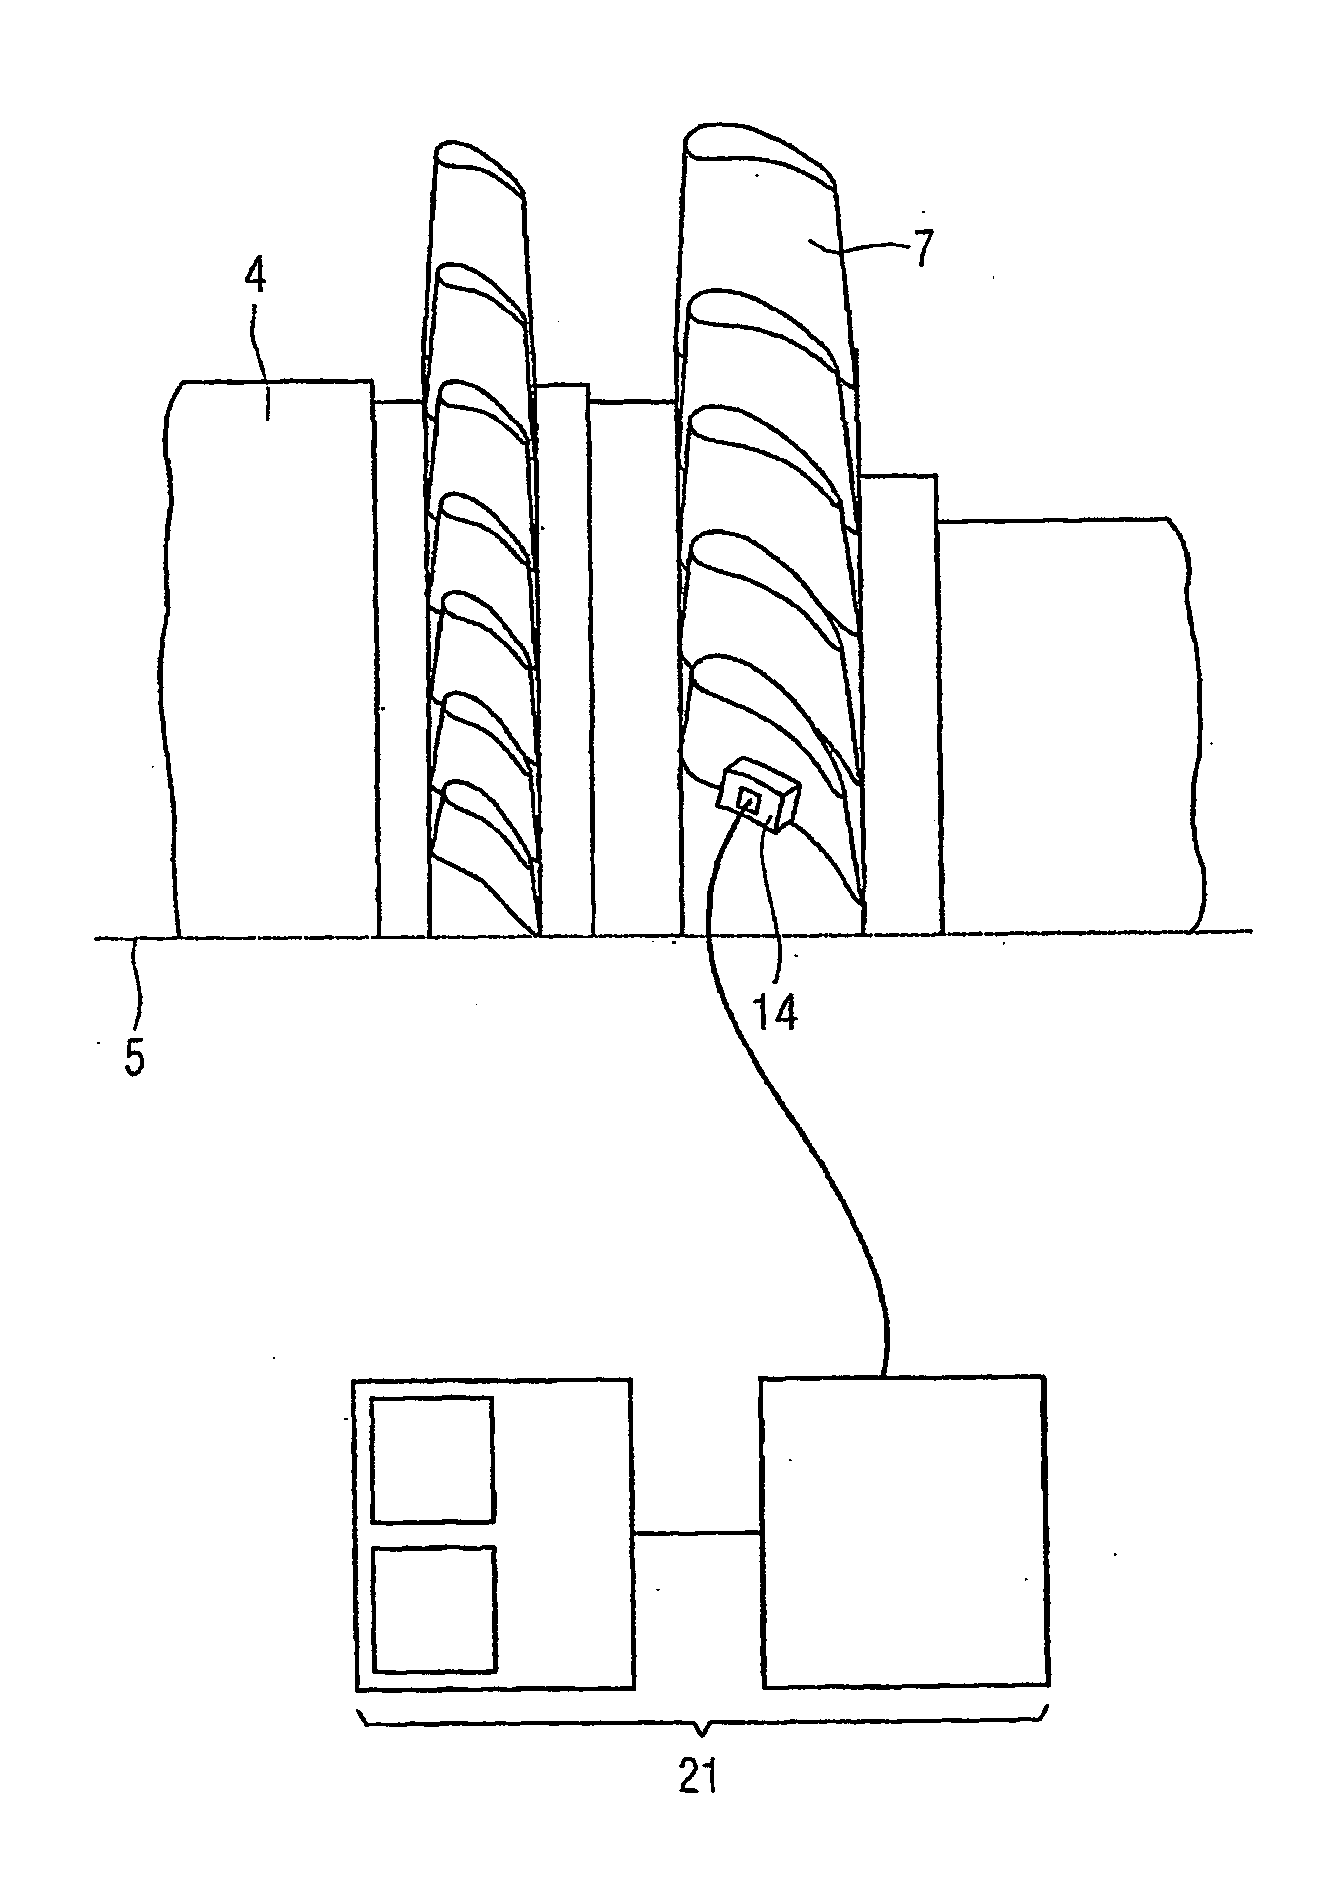 Method and Device for Determining Defects in a Turbine Blade